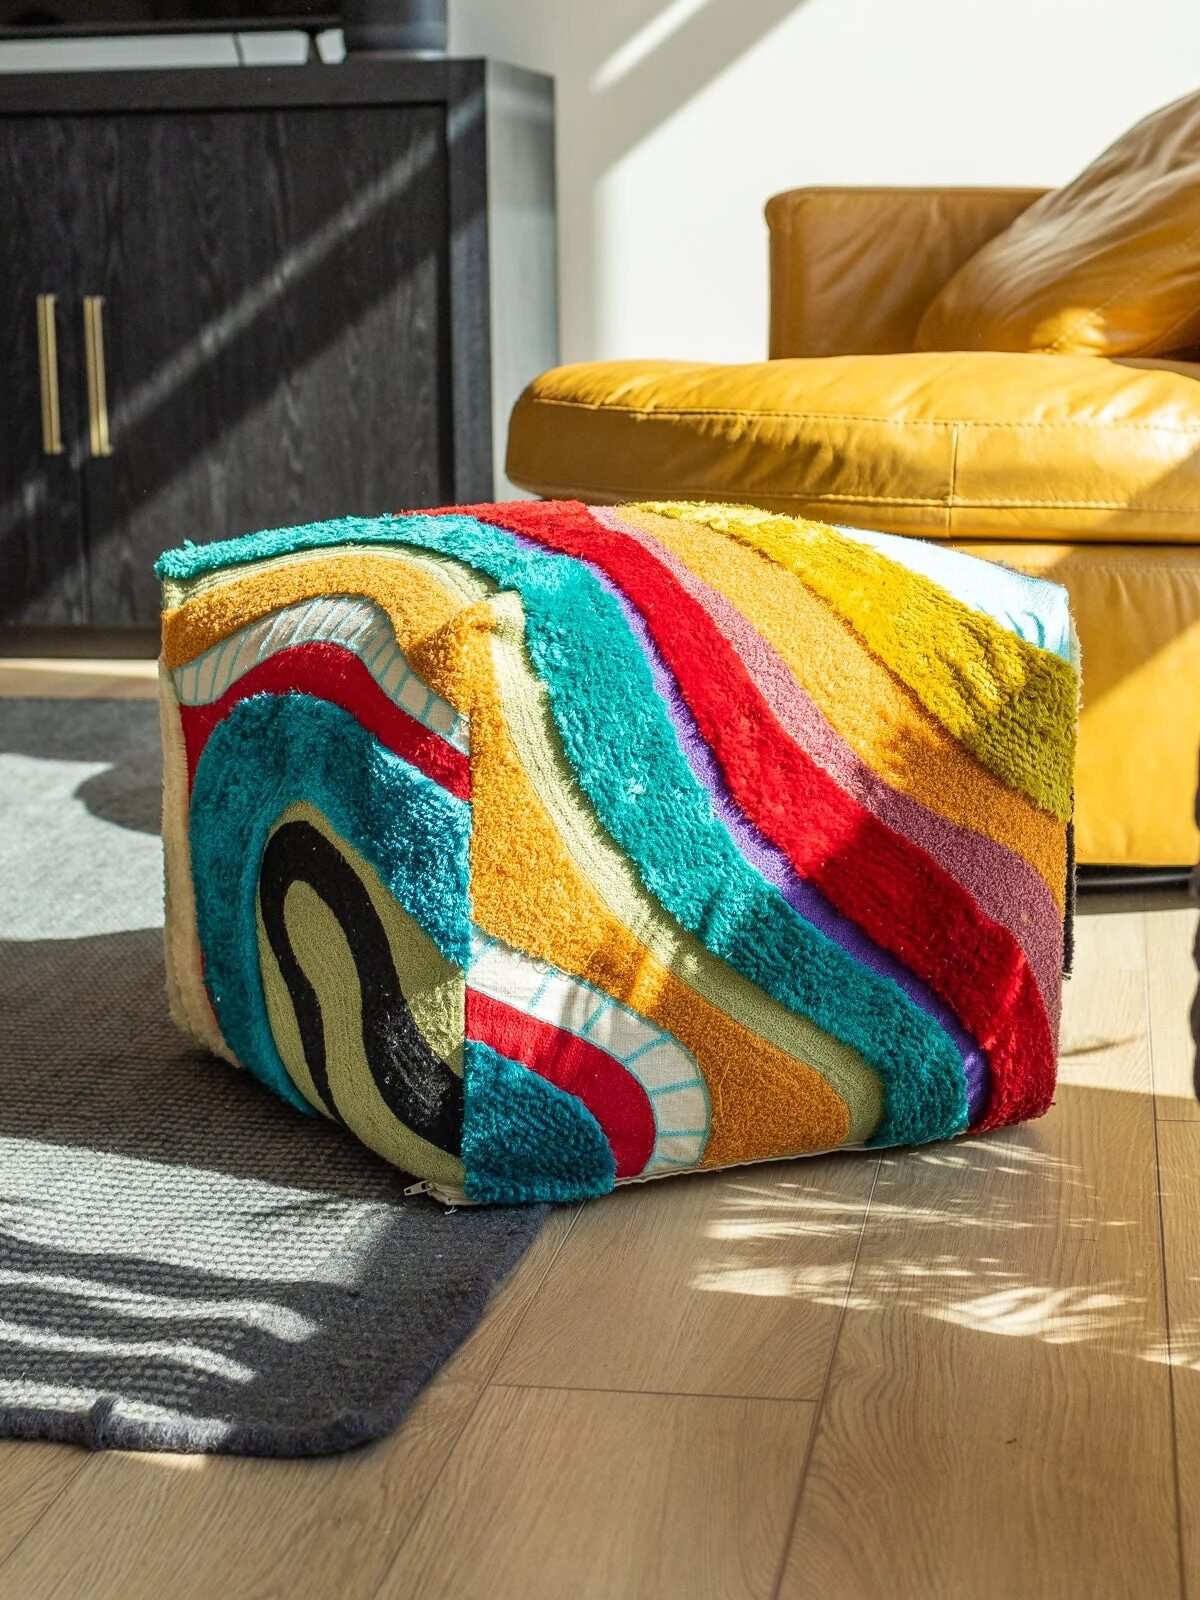 Brightly colored pouf with abstract design in a room with a hardwood floor, bathed in natural sunlight.